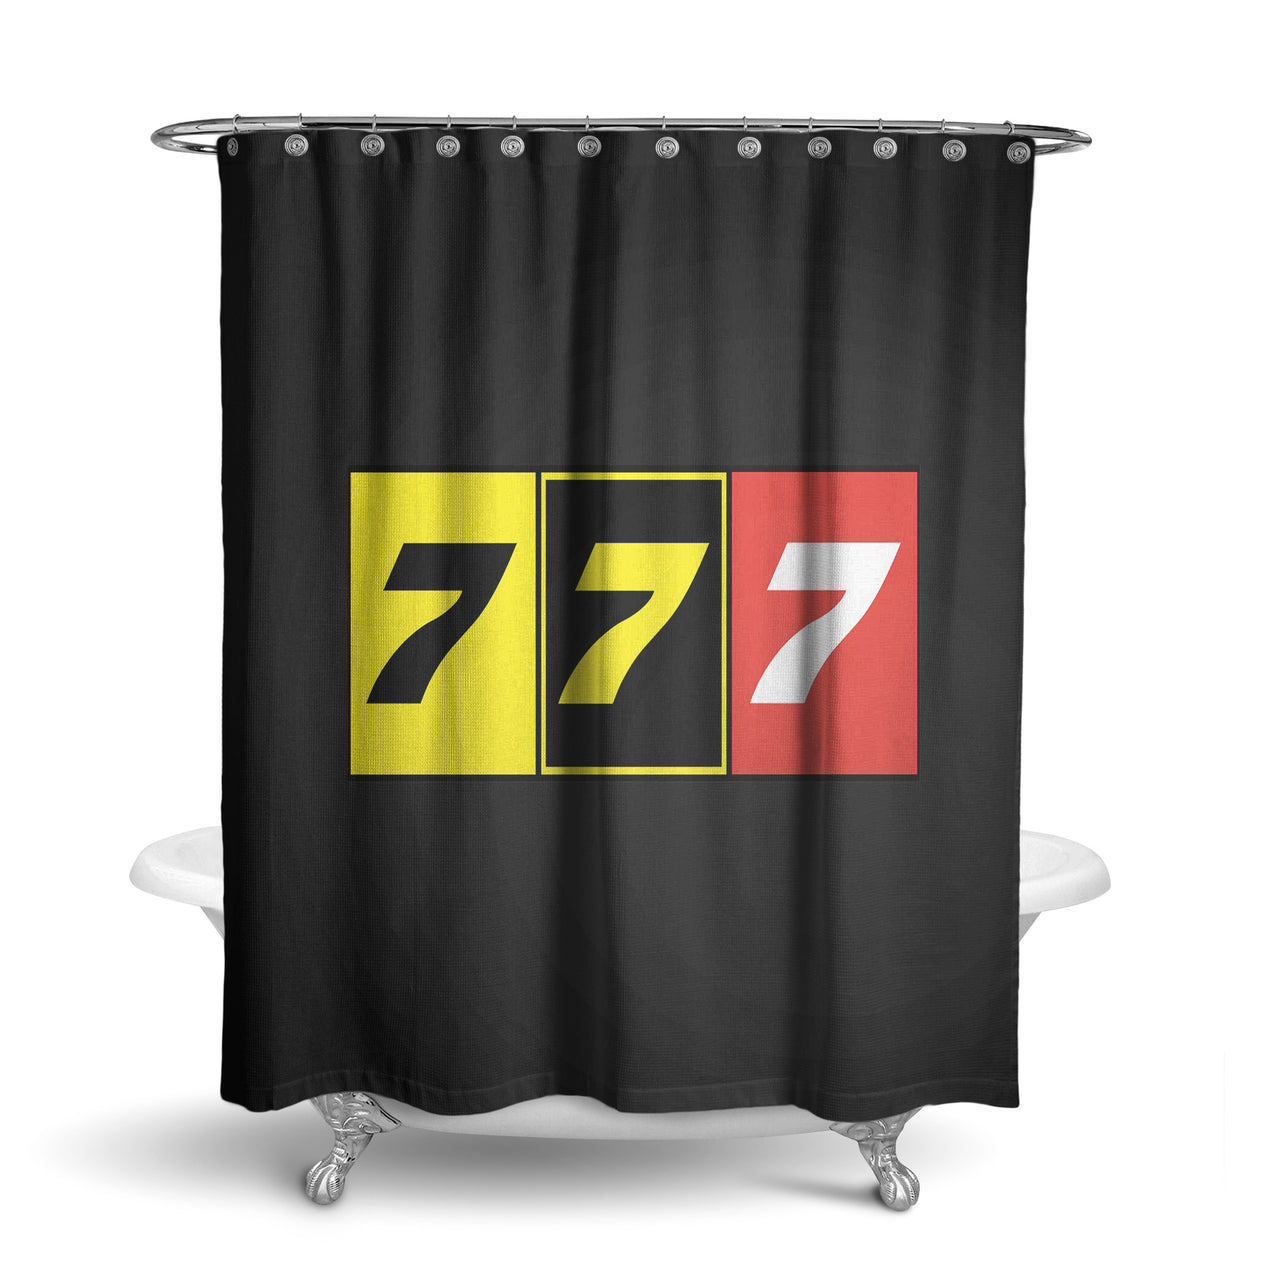 Flat Colourful 777 Designed Shower Curtains